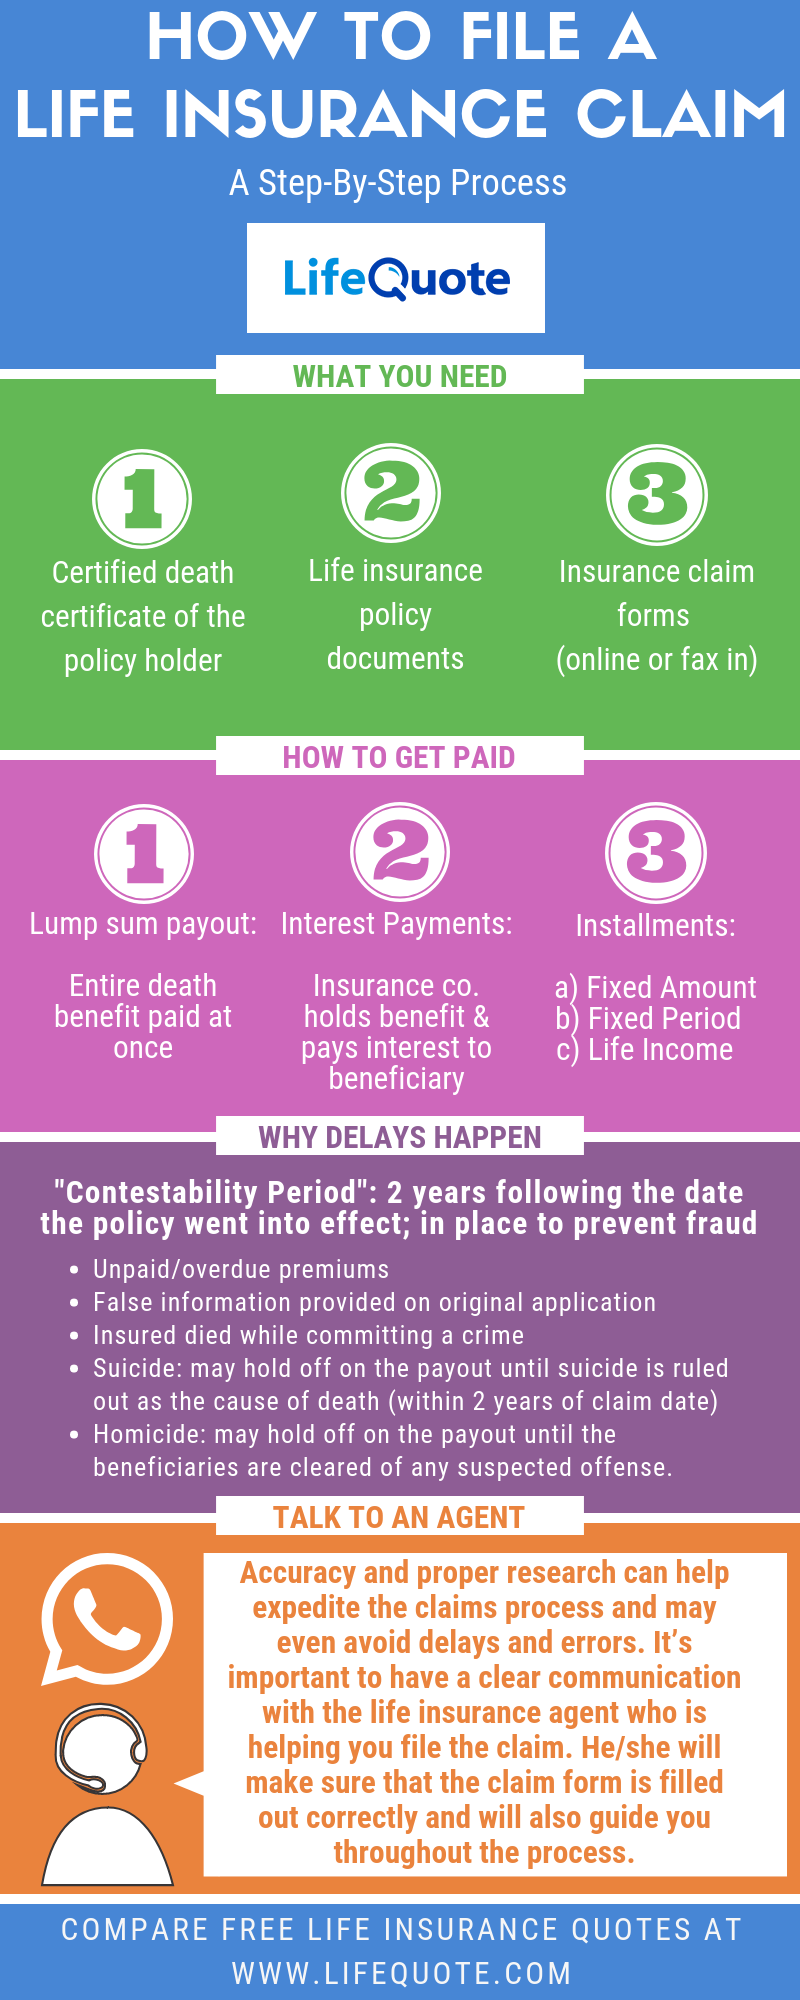 How to File a Life Insurance Claim: A Step by Step Process